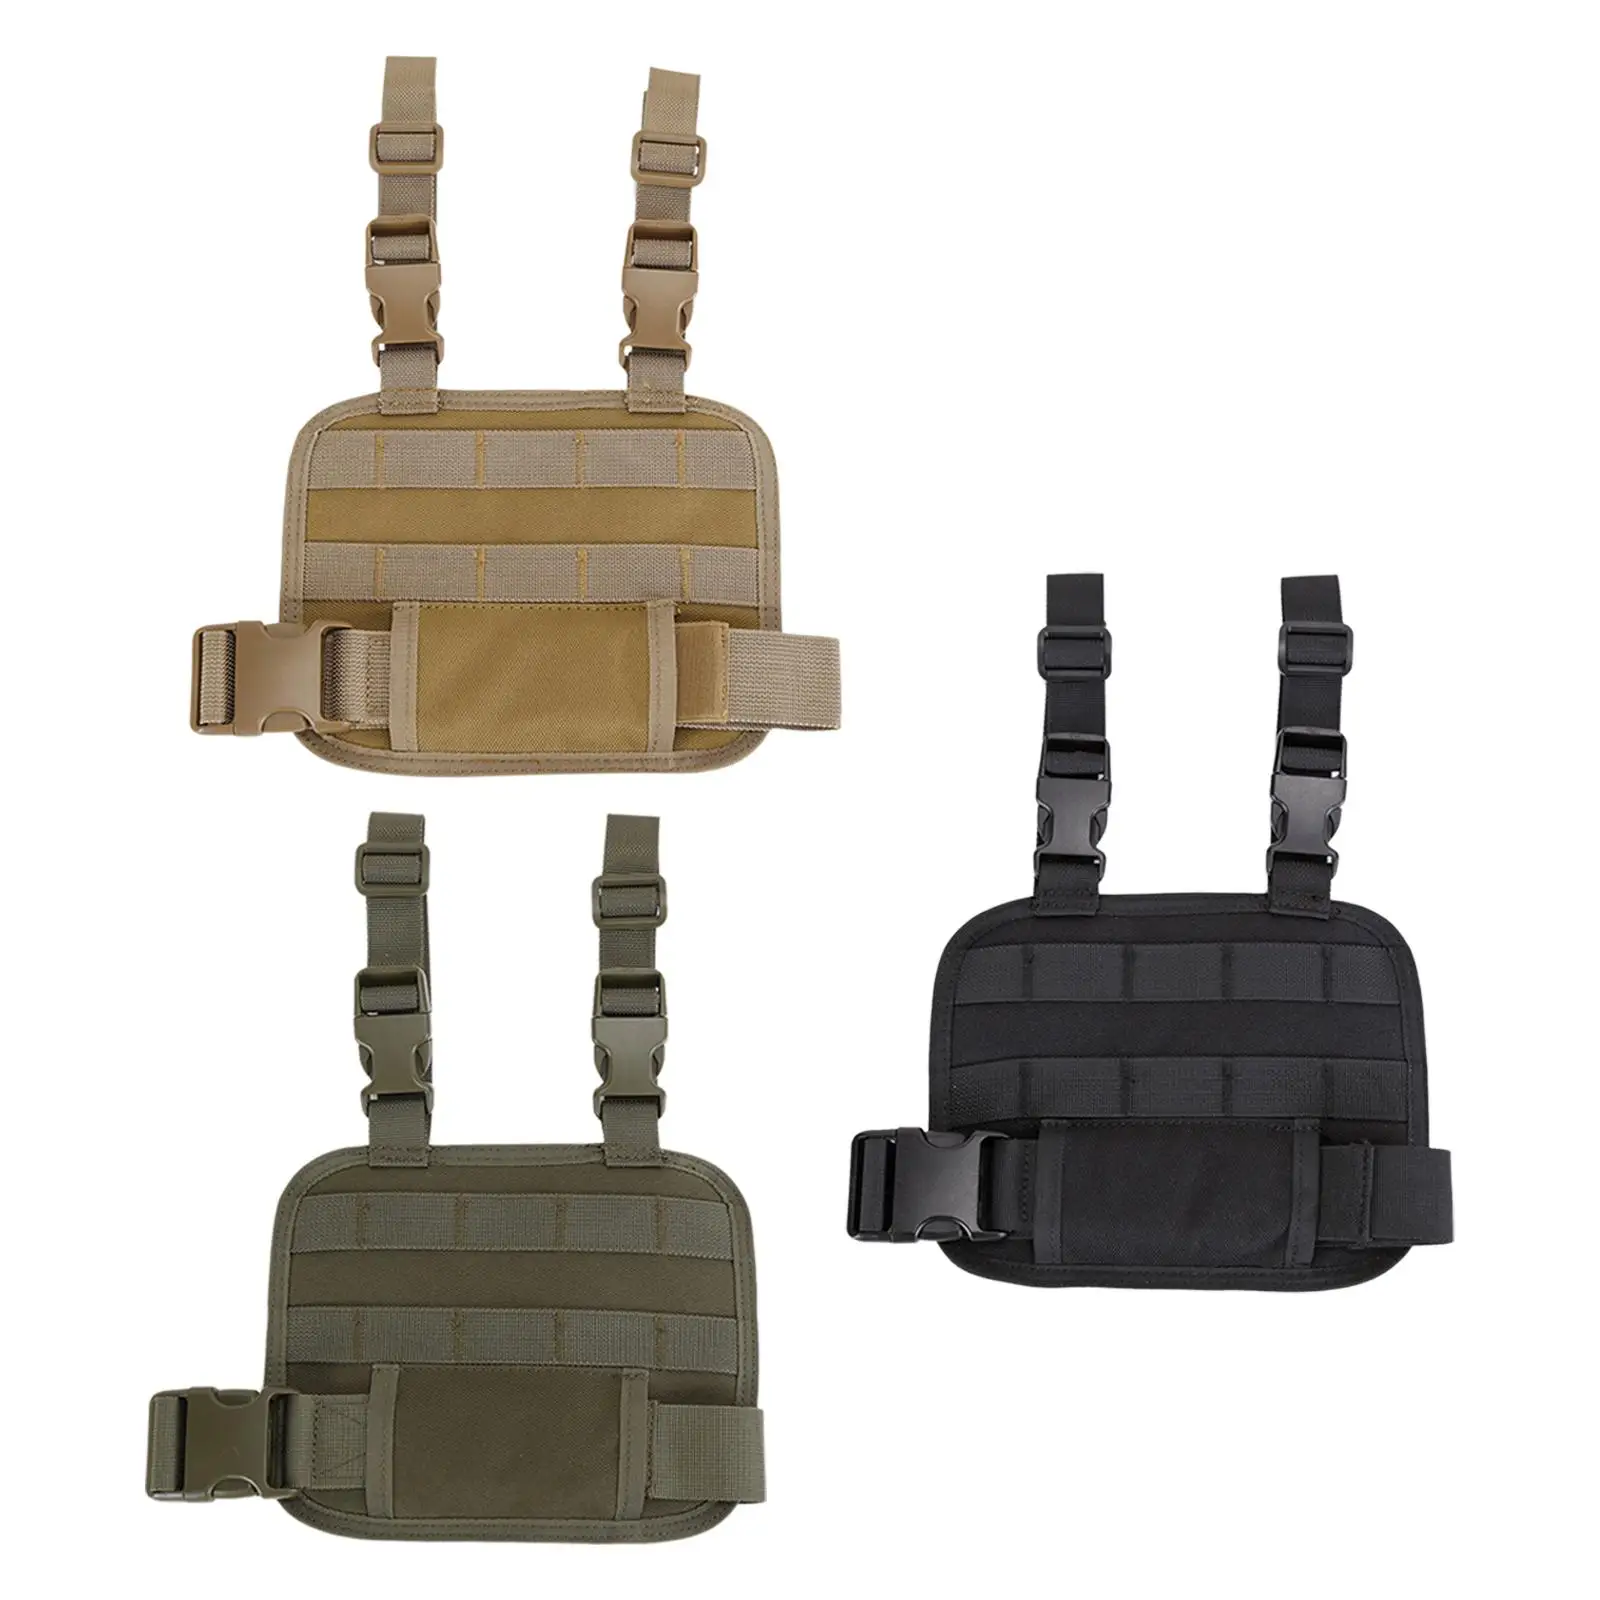 Portable Magazine Pouch Leg Molle Adjustable Vest Bag Breathable Durable Magazine Pouch Molle Panel for Outdoor Hunting Camping